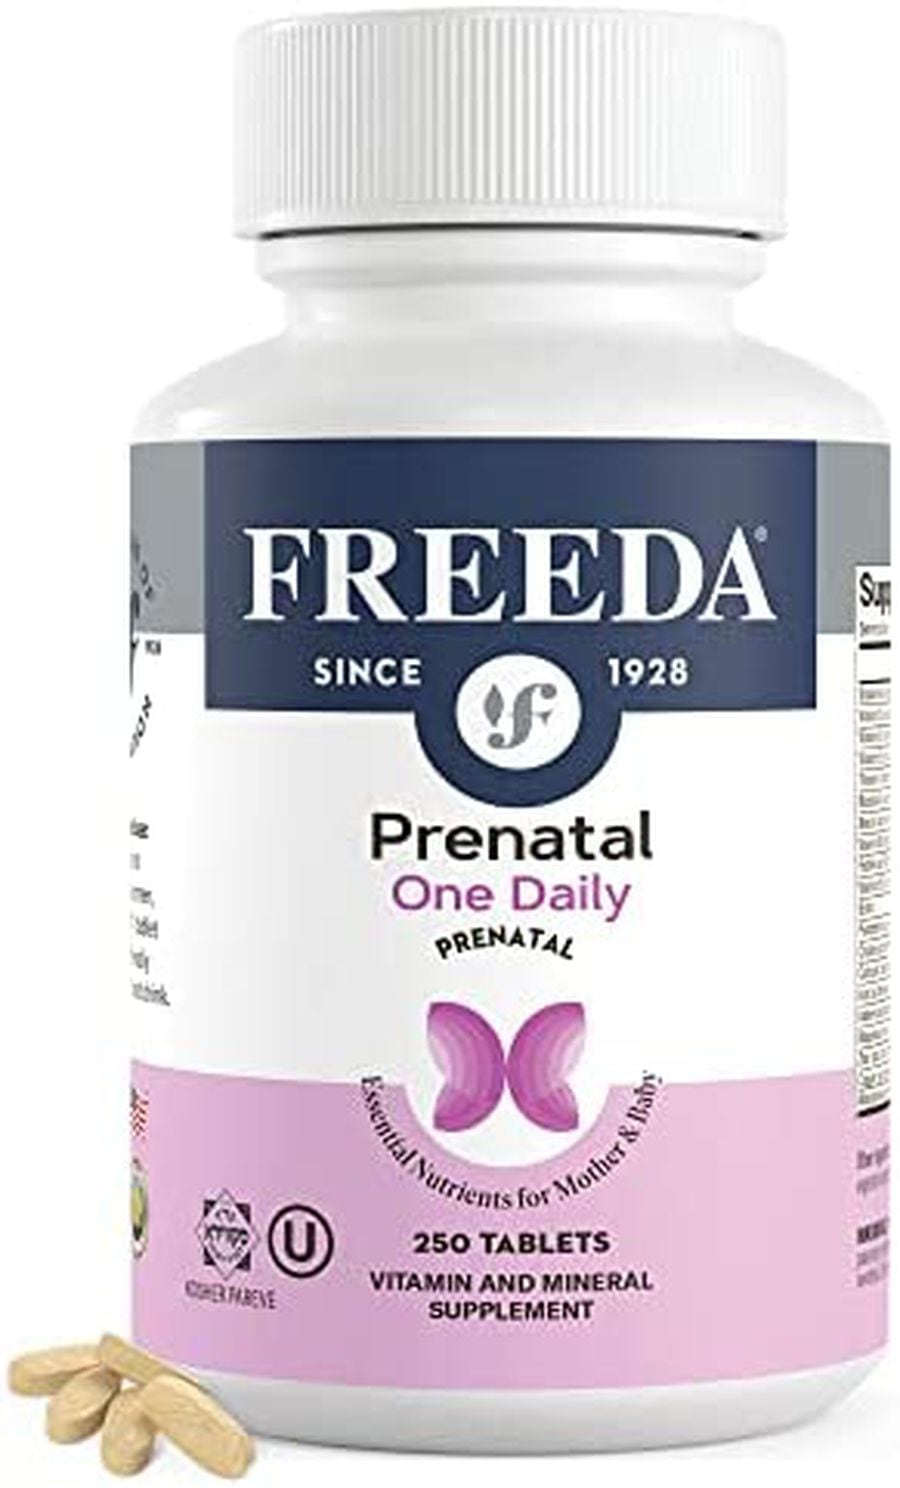  PURE SYNERGY PureNatal Prenatal Vitamins, Vegan Supplement  Made with Organic Whole Foods, with Natural Iron, Folate, and Choline